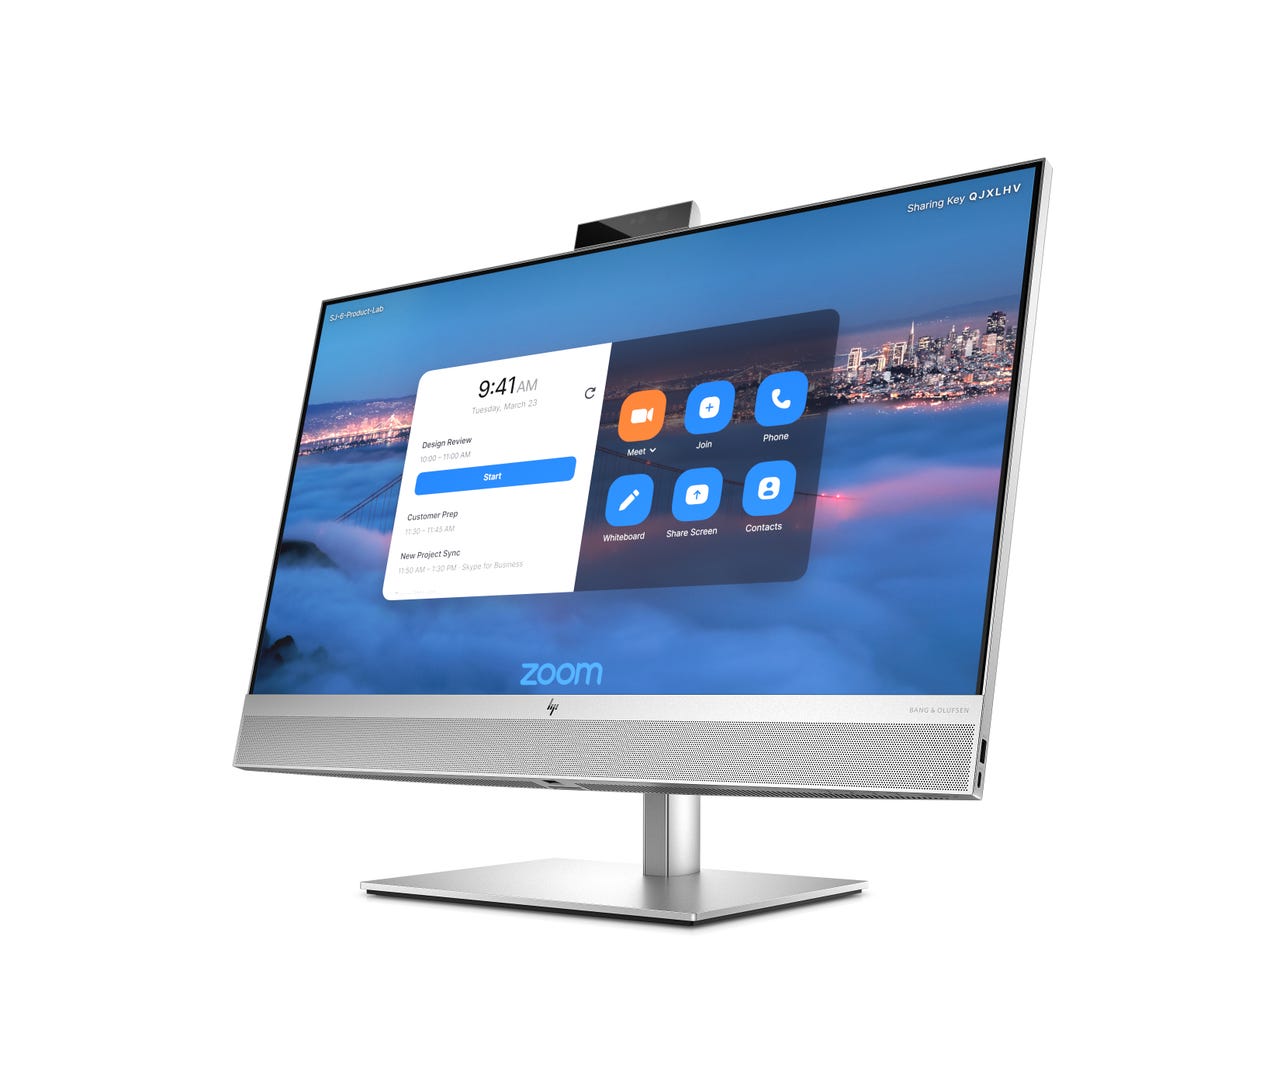 HP rolls out new All-in-One PCs, desktops designed for all work  environments